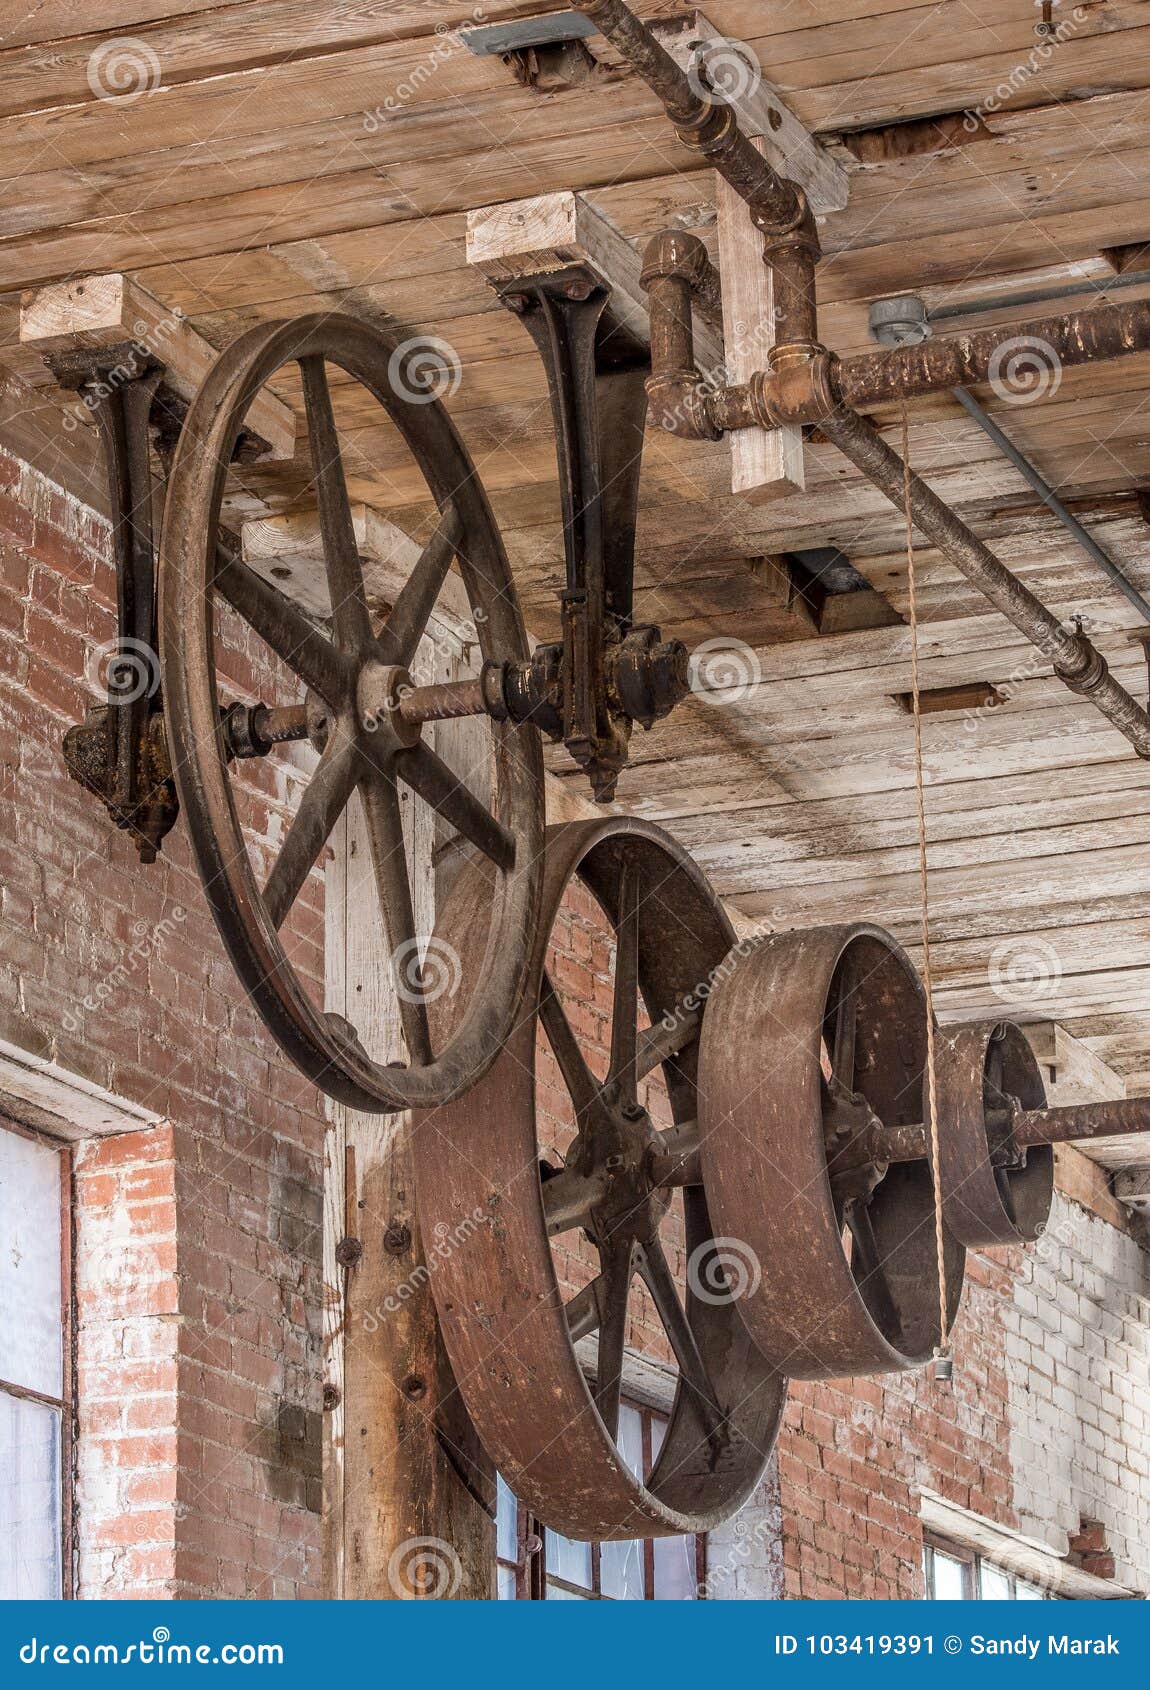 Gears And Pulleys On A Ceiling In Old Warehouse Stock Image